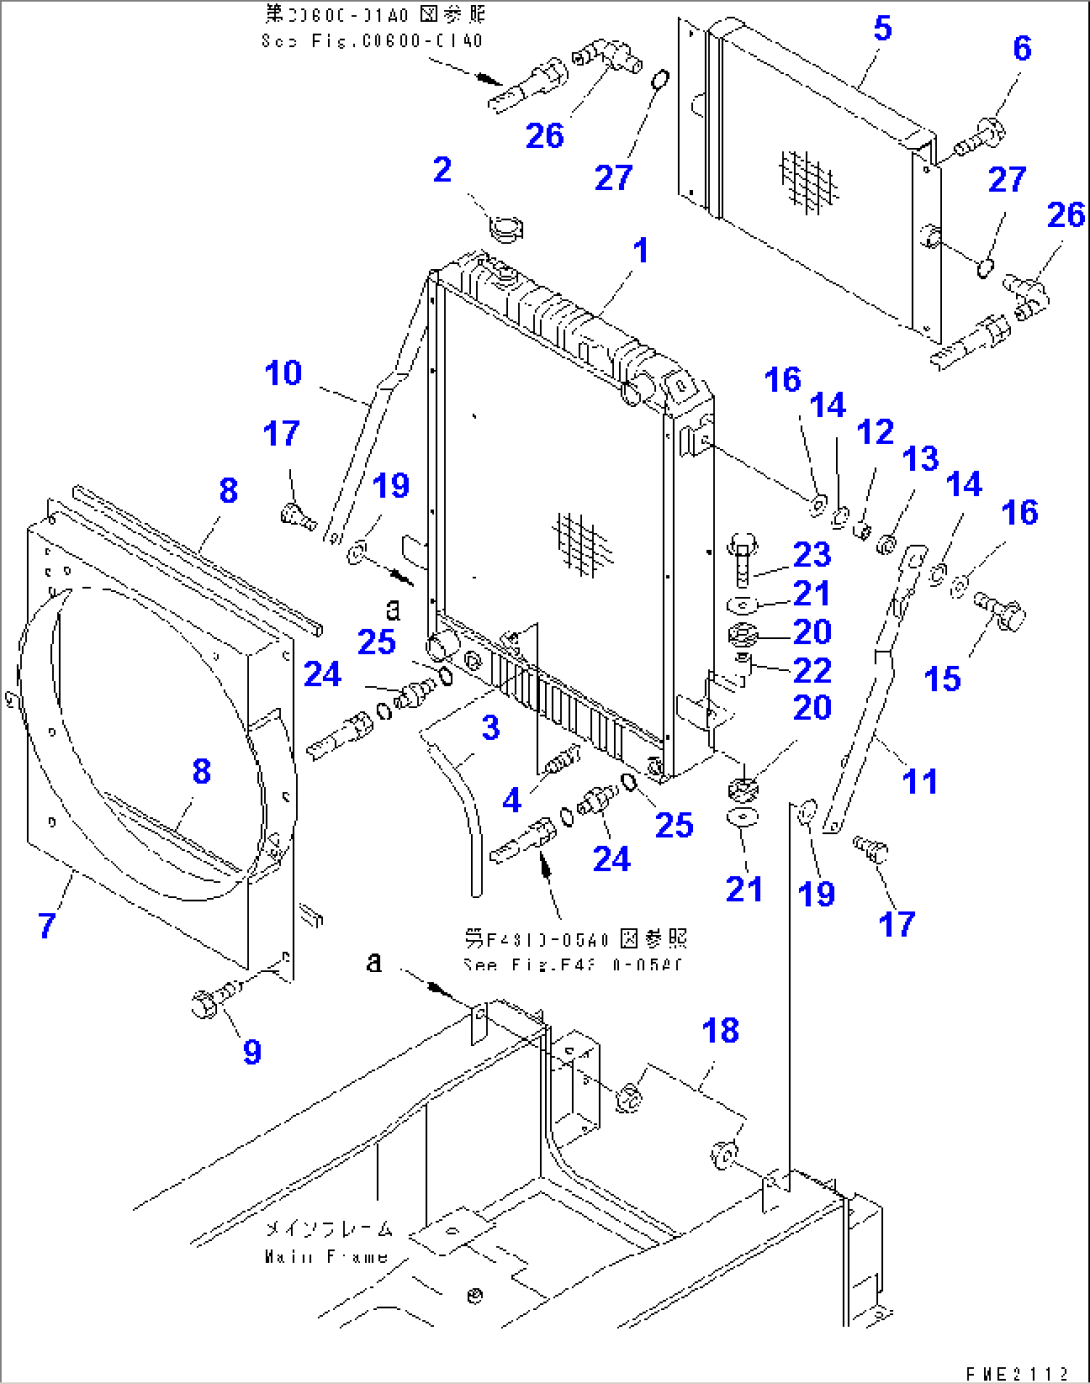 RADIATOR AND MOUNTING PARTS(#15001-15300)